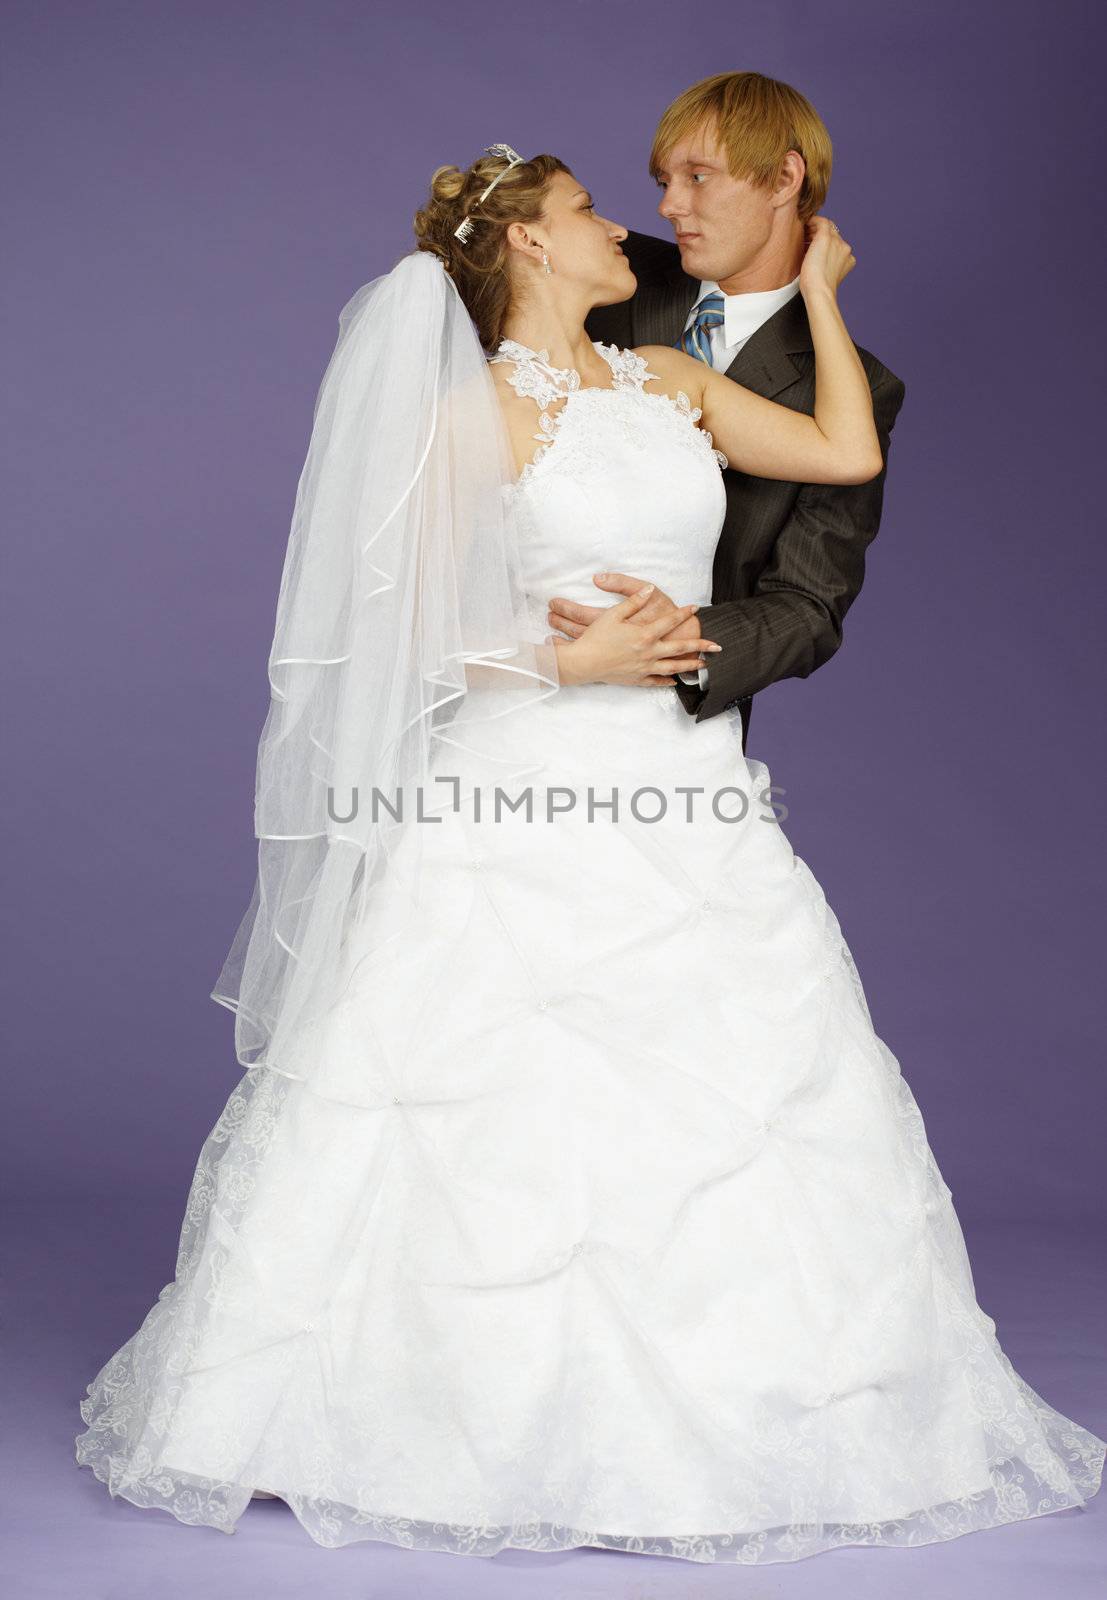 The bride and groom pose on studio